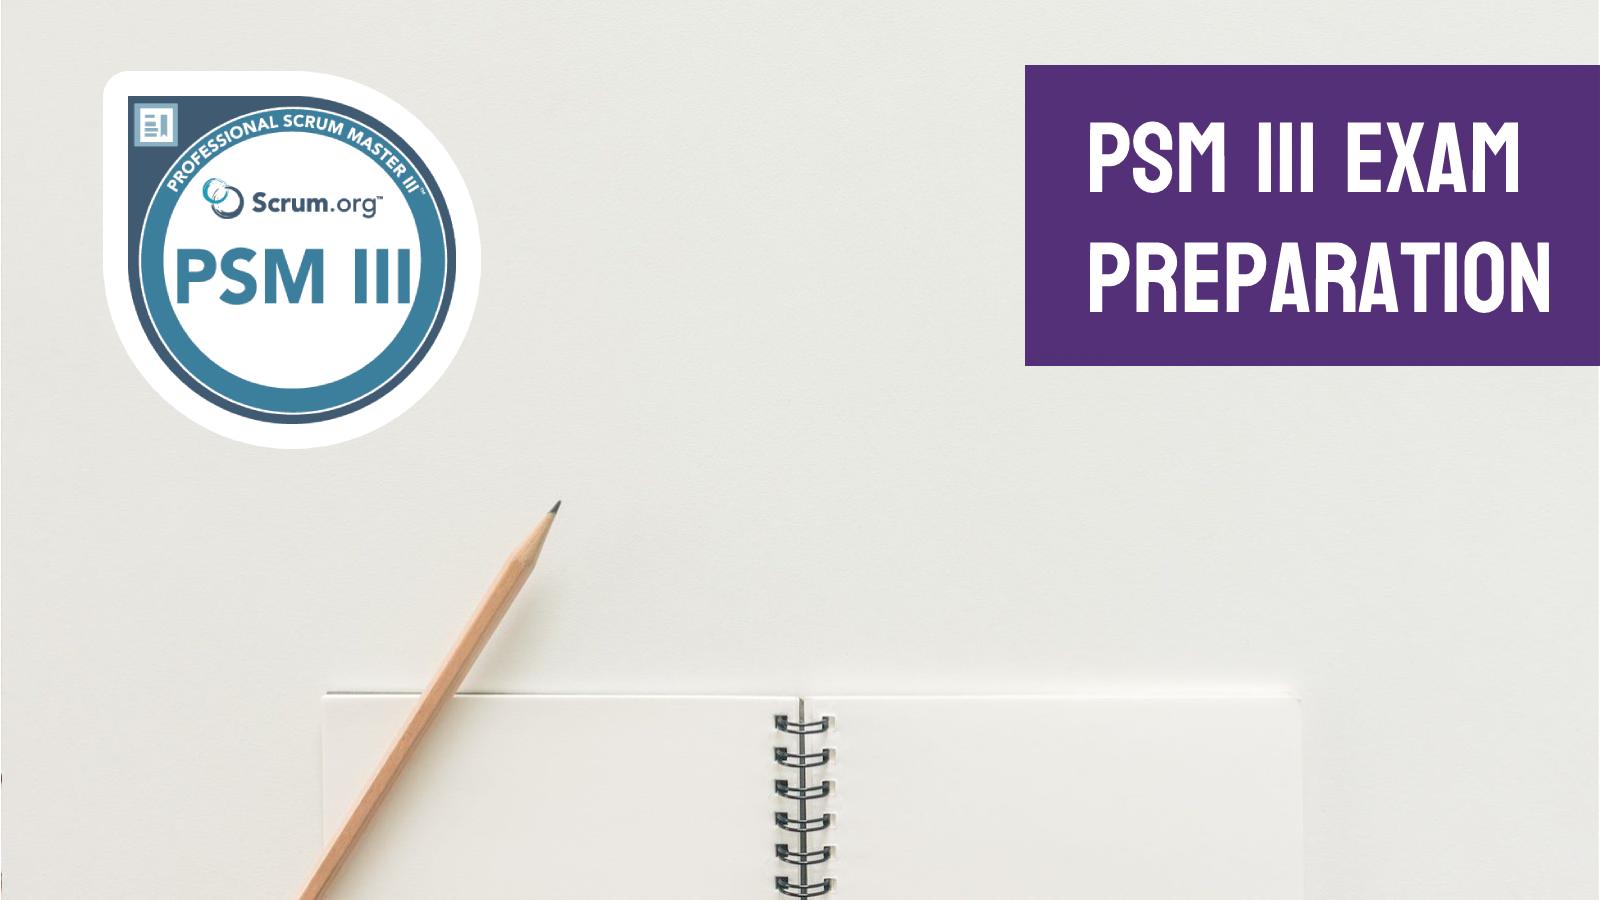 How to prepare for the PSM 3 certification exam and successfully pass it on the first try?